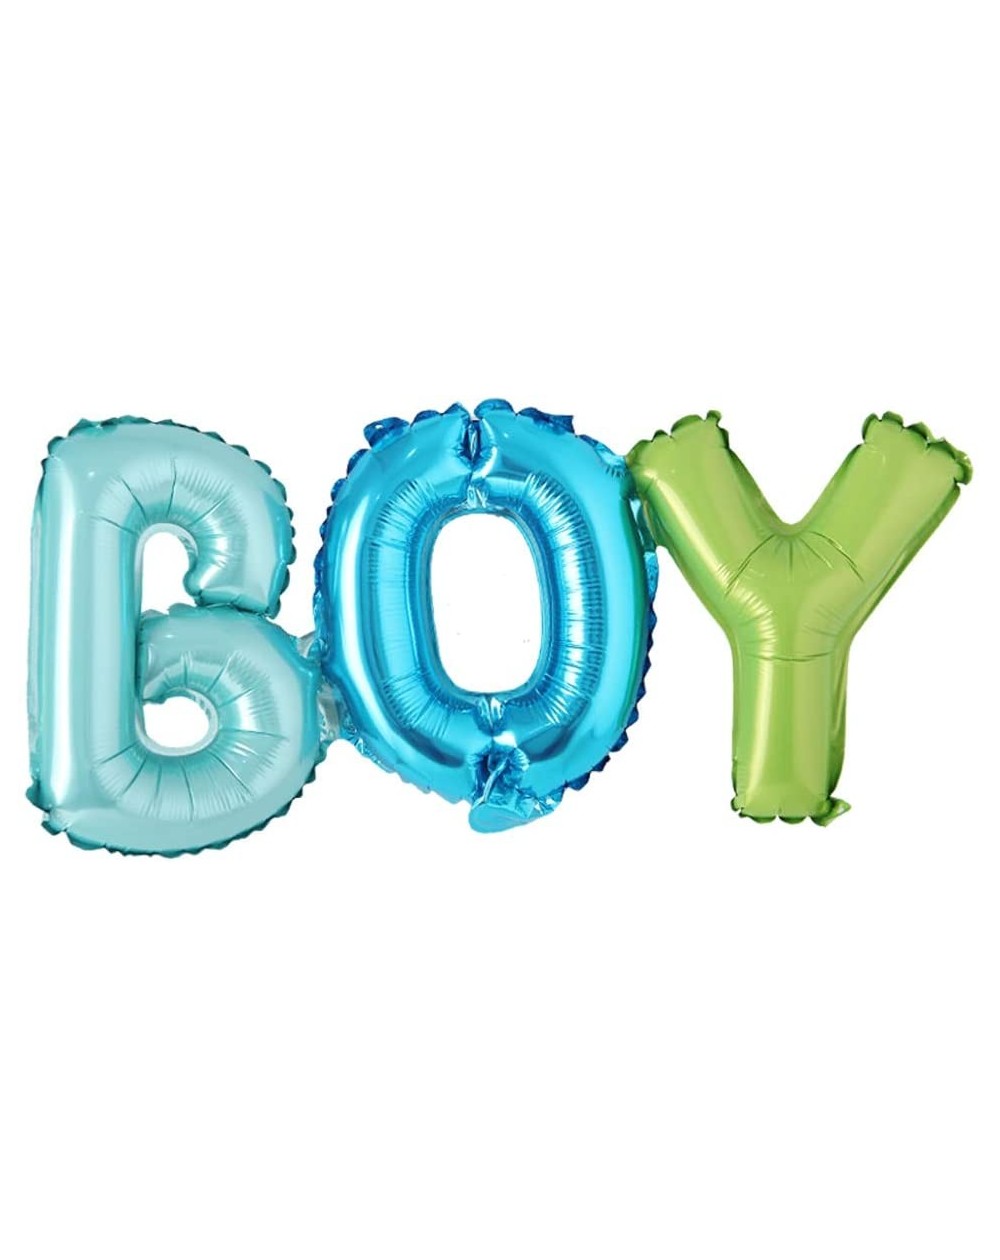 Balloons ITS A Boy Girl Connection Letter foil Balloons Children Party Decoration Birthday Party Balloons Inflatable Helium B...